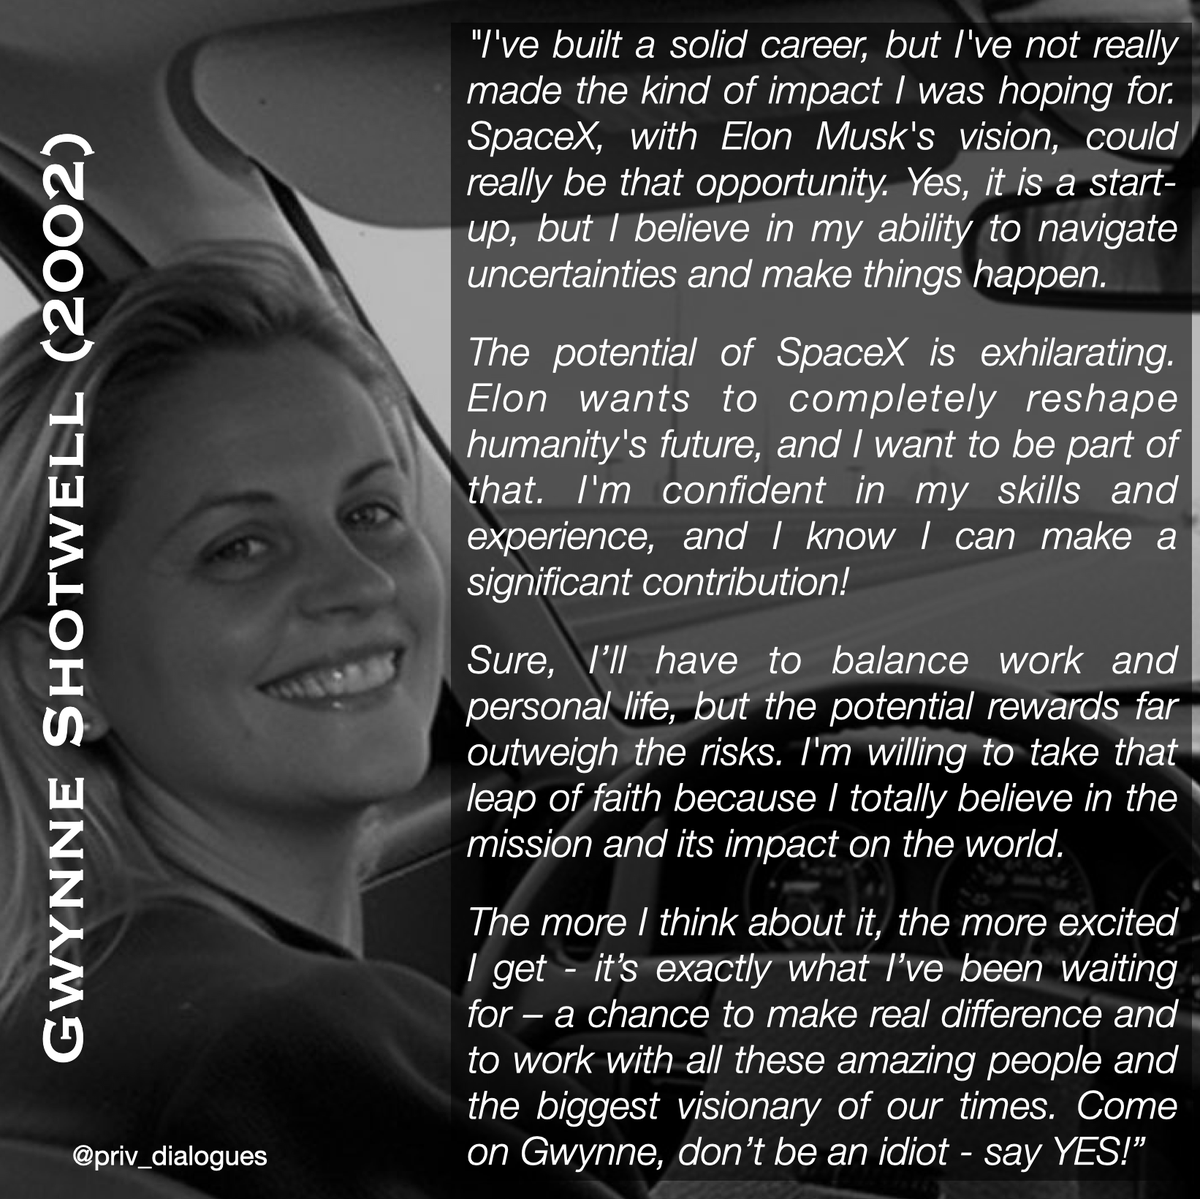 In 2002, @Gwynne_Shotwell  took a leap of faith, joining @SpaceX & working with @elonmusk on their mission to revolutionize space exploration. The rest is history! 🚀 #SpaceX #GwynneShotwell #MarsBound #SpaceInnovation #PrivateDialogues